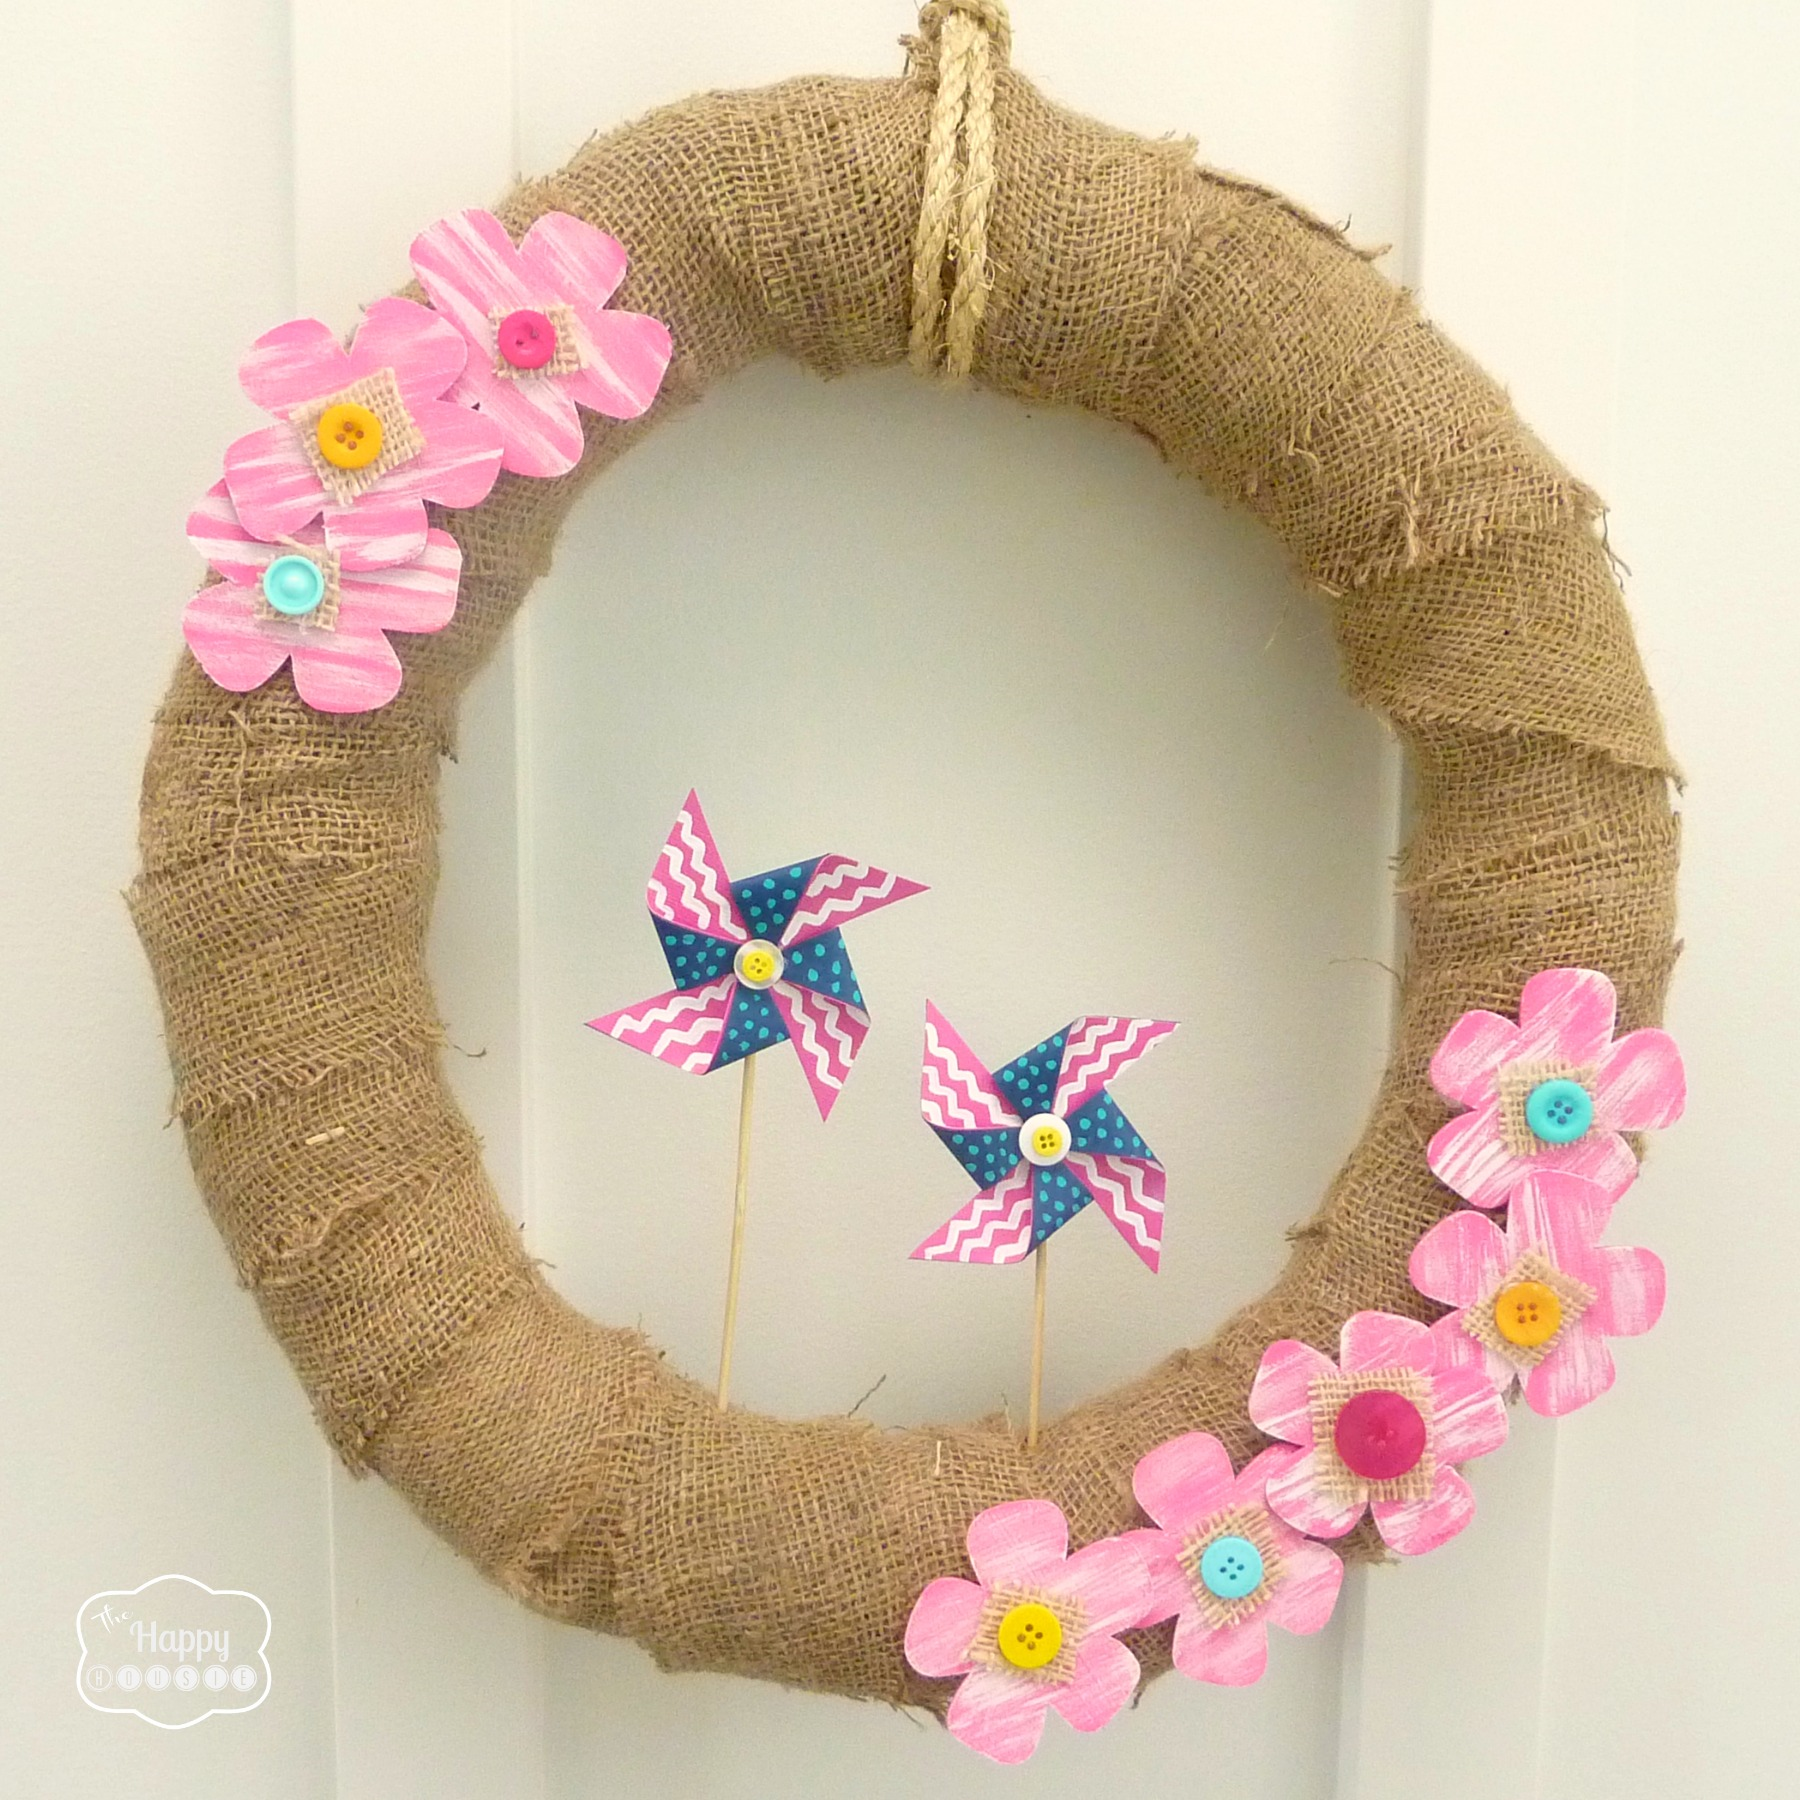 A neutral wreath with pink flowers on it, hanging on a white door.